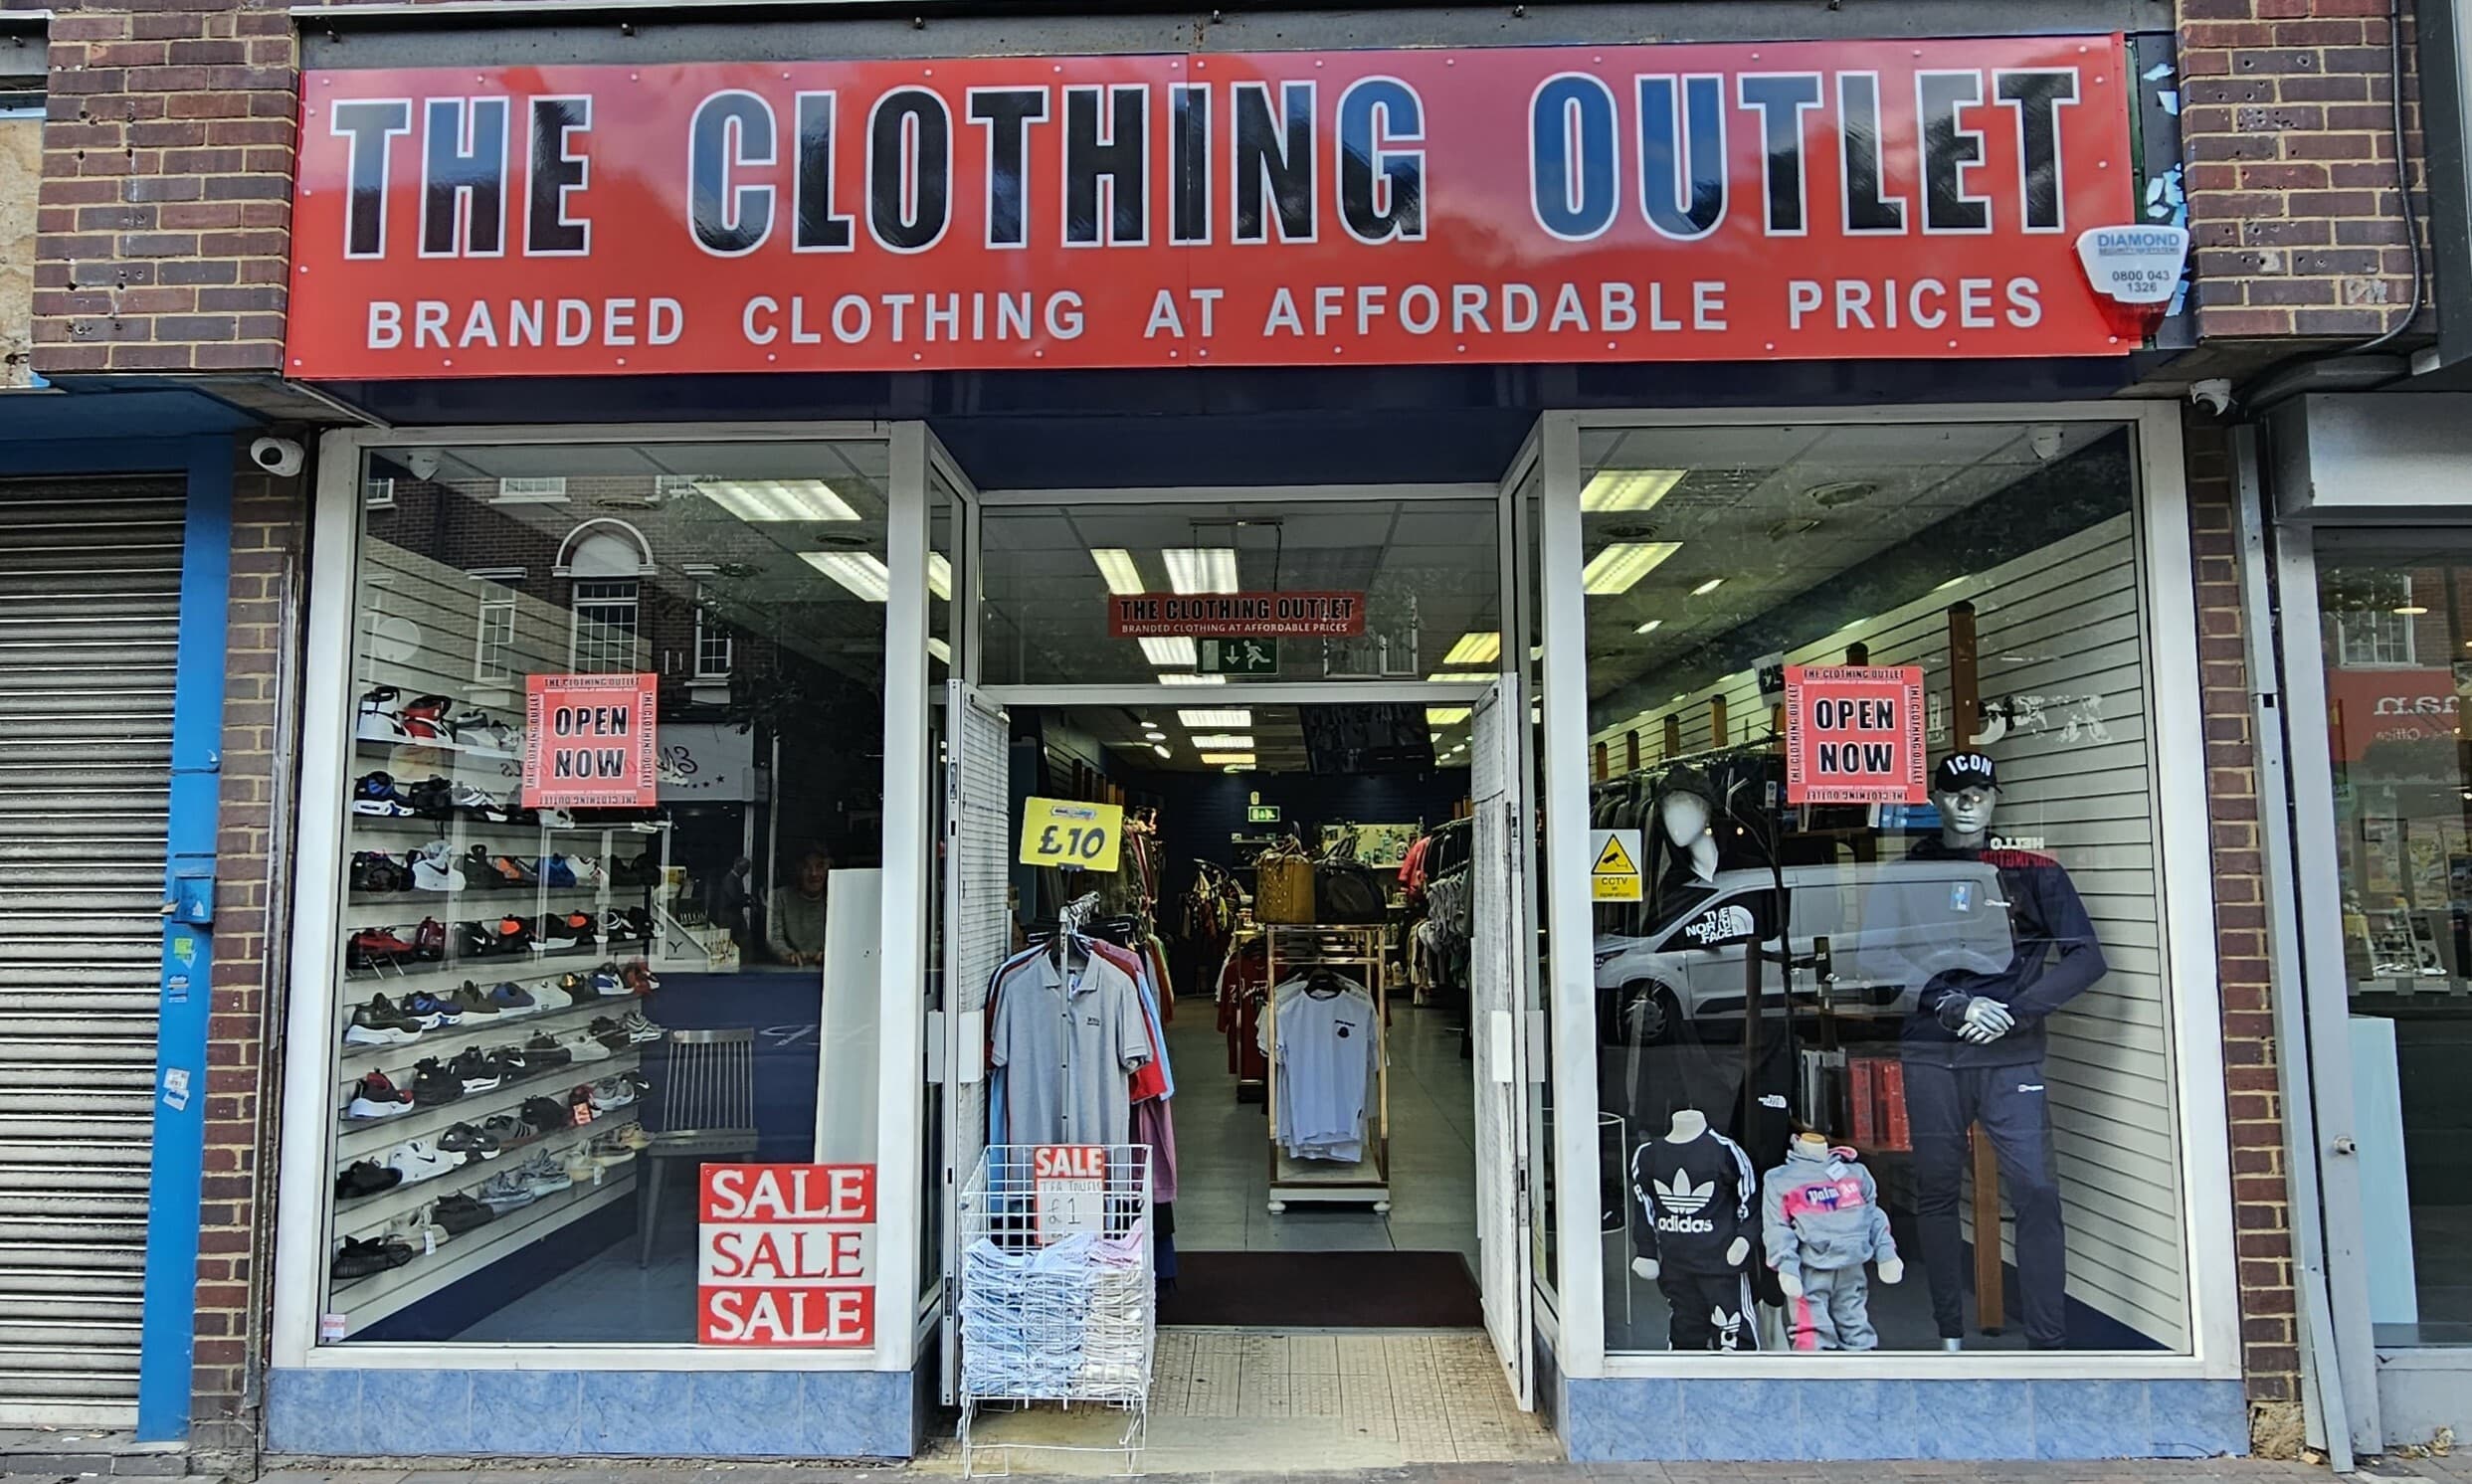 The Clothing Outlet